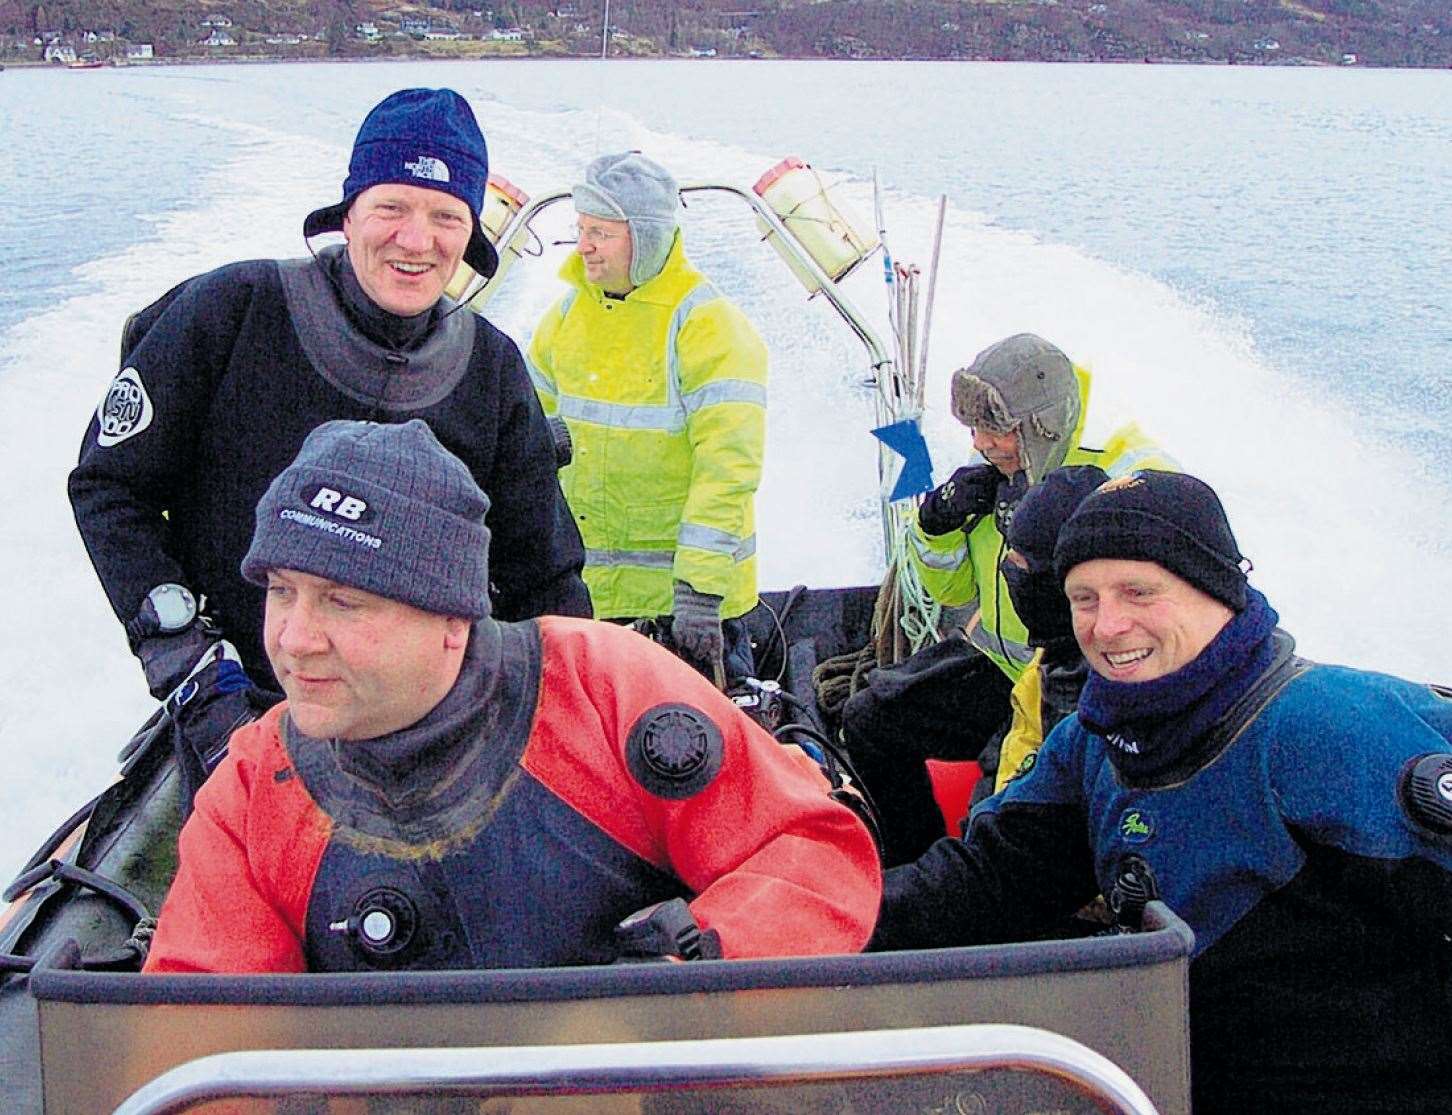 Members of Caithness Diving Club travelling on board the club’s boat, Hagar, for a dive around Loch Broom and the Summer Isles in 2009.